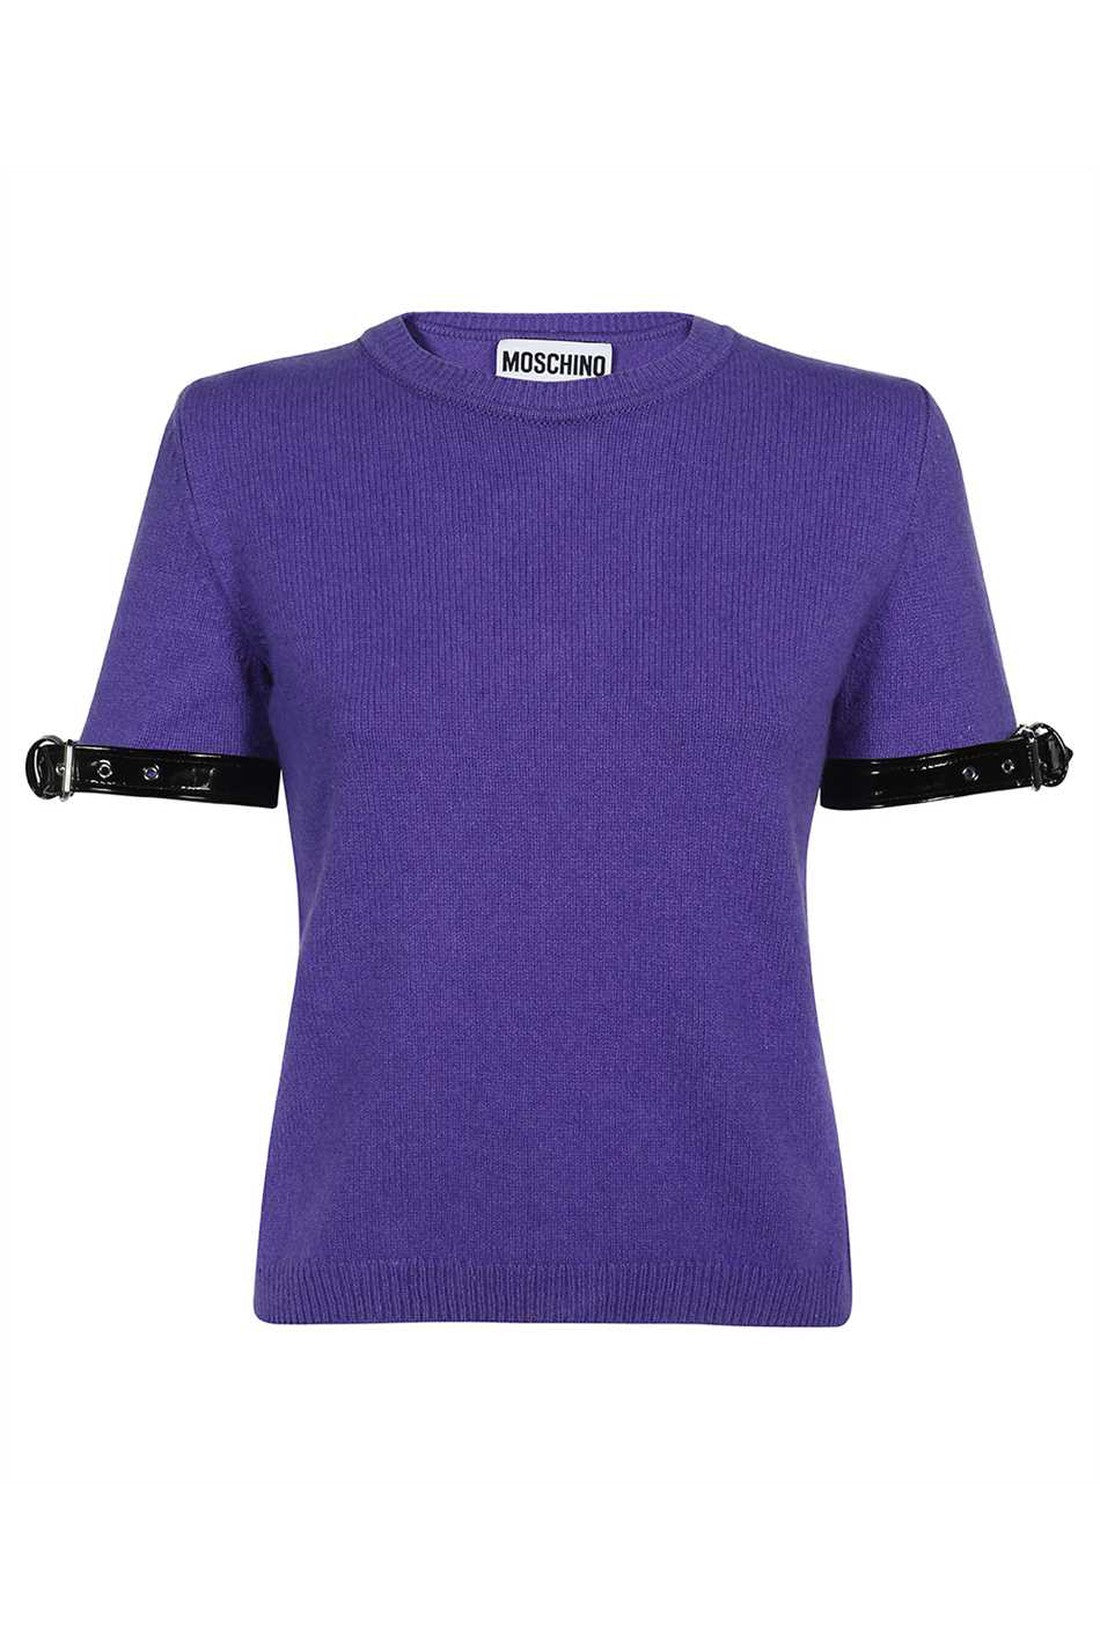 Wool blend t-shirt-Moschino-OUTLET-SALE-40-ARCHIVIST